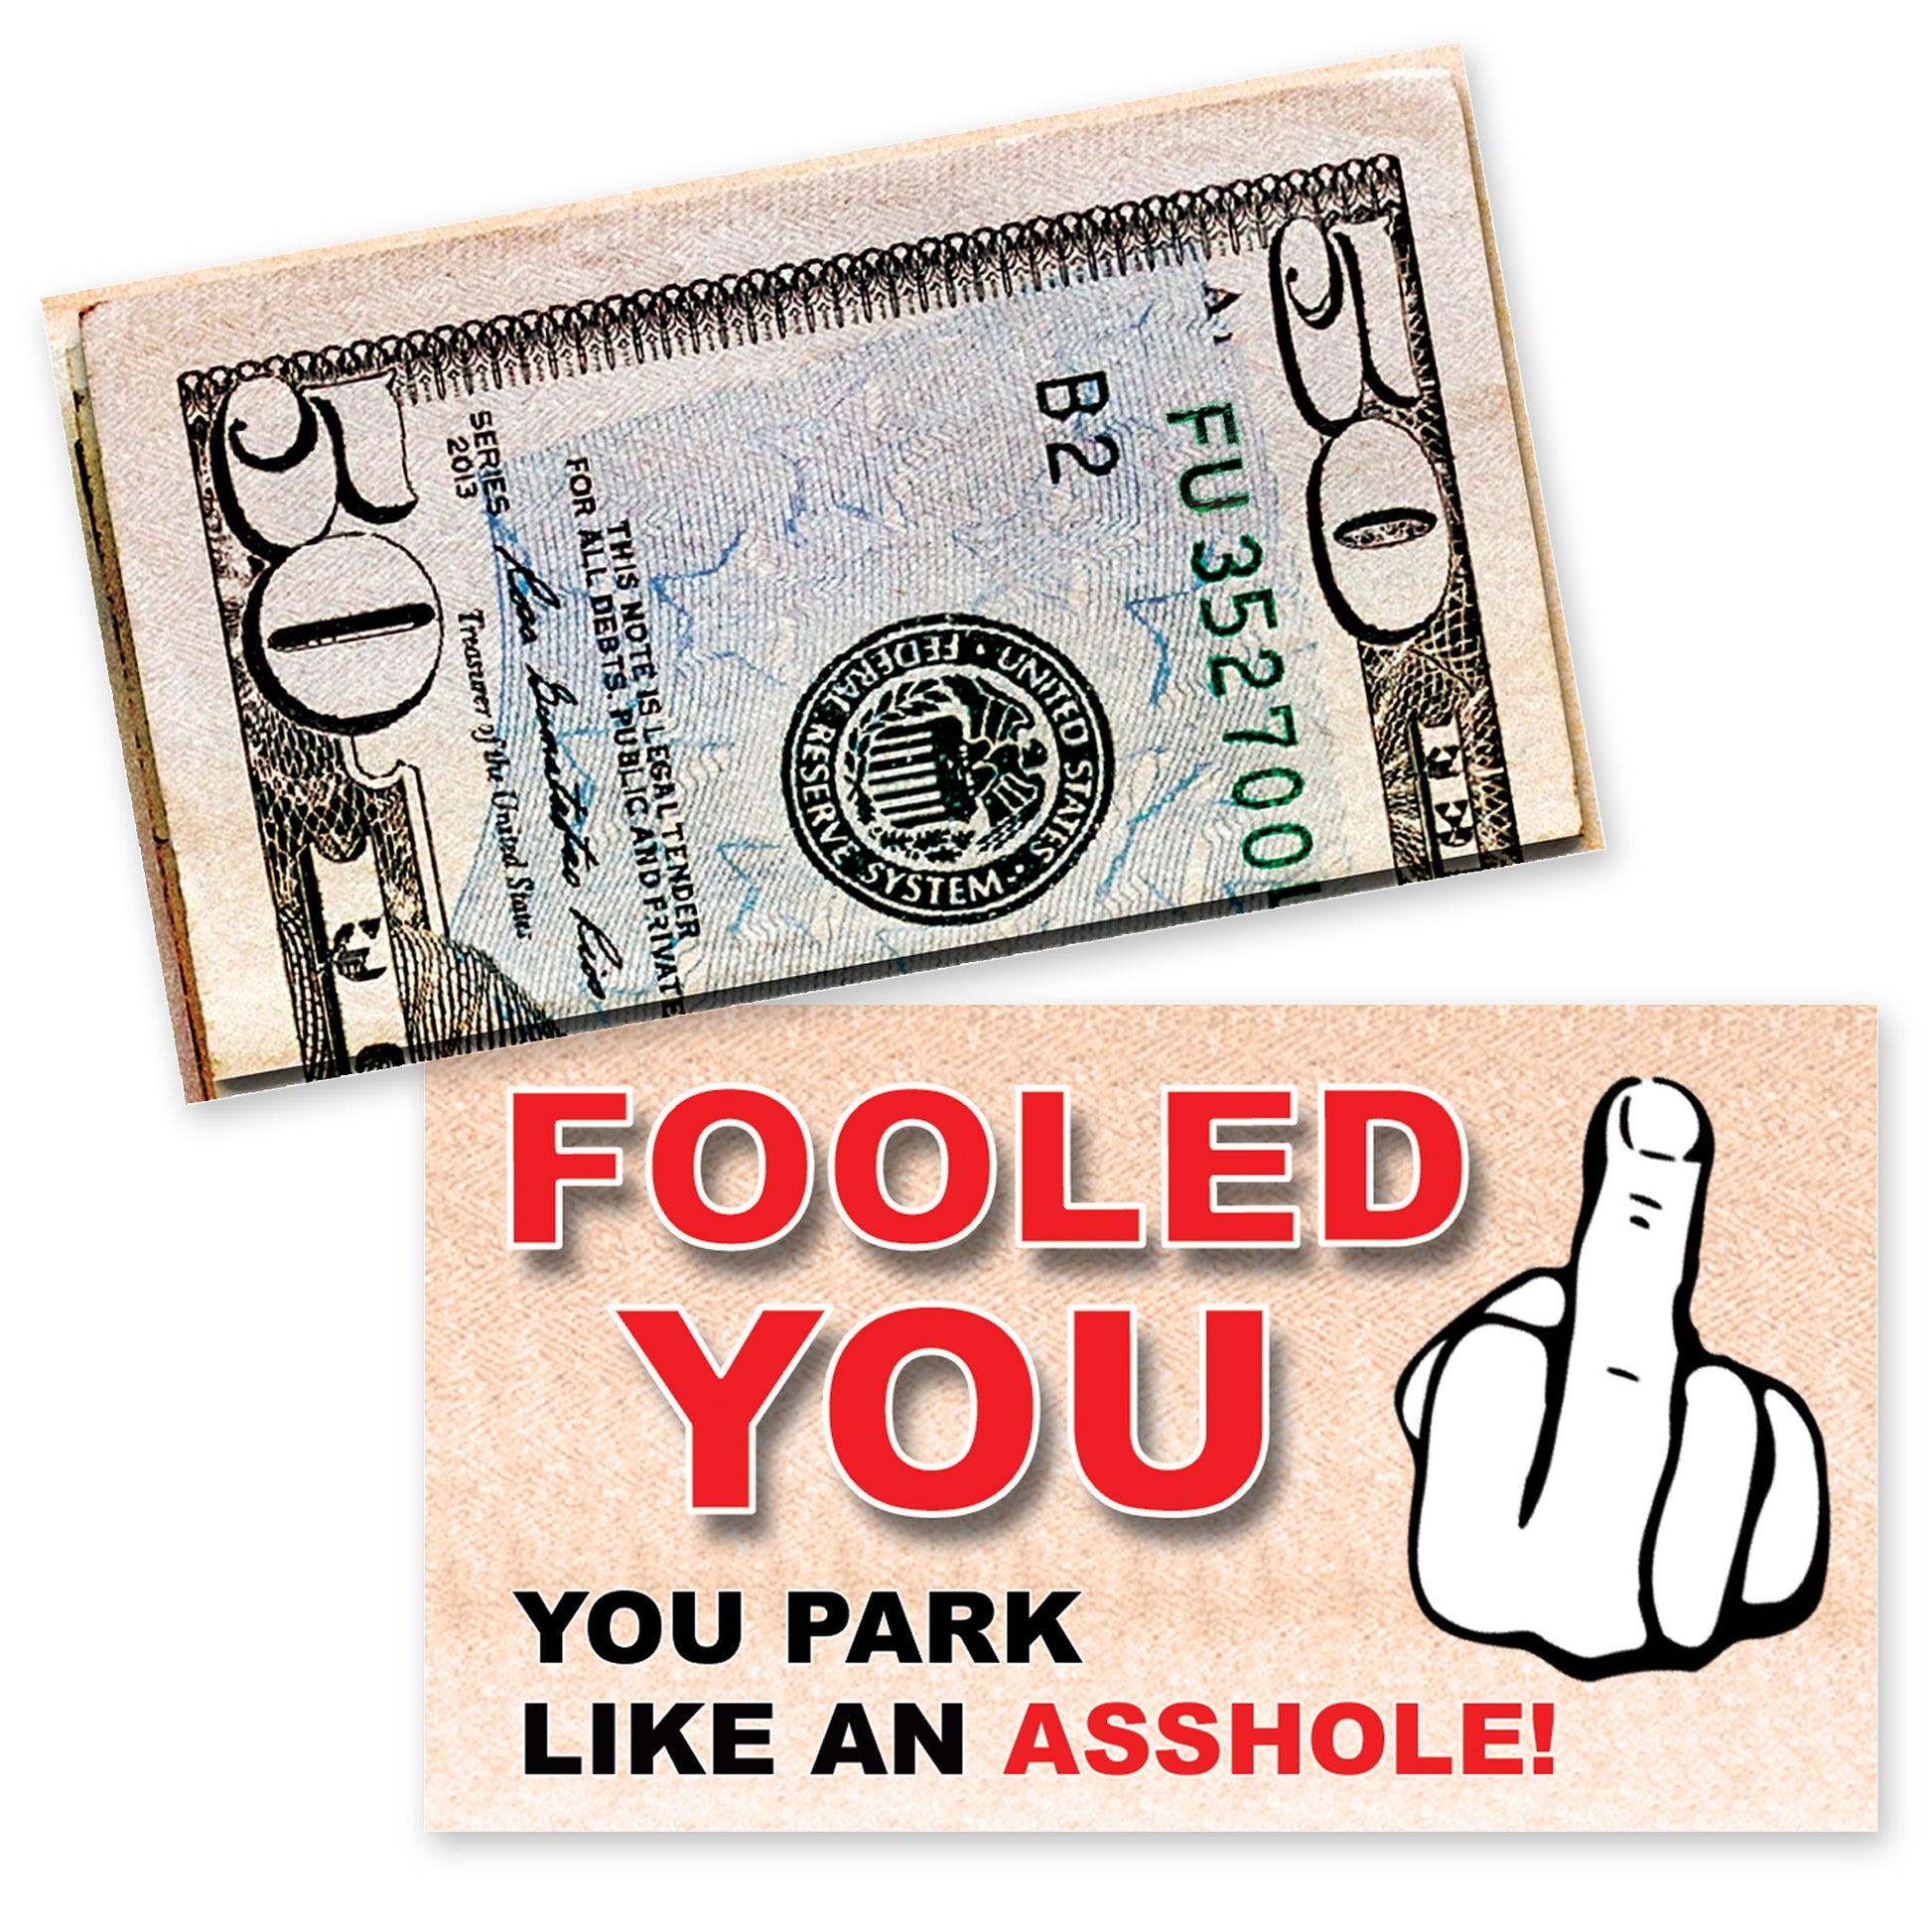 Fake Money Bad Parking Prank Cards that you leave under Windshield Wipers